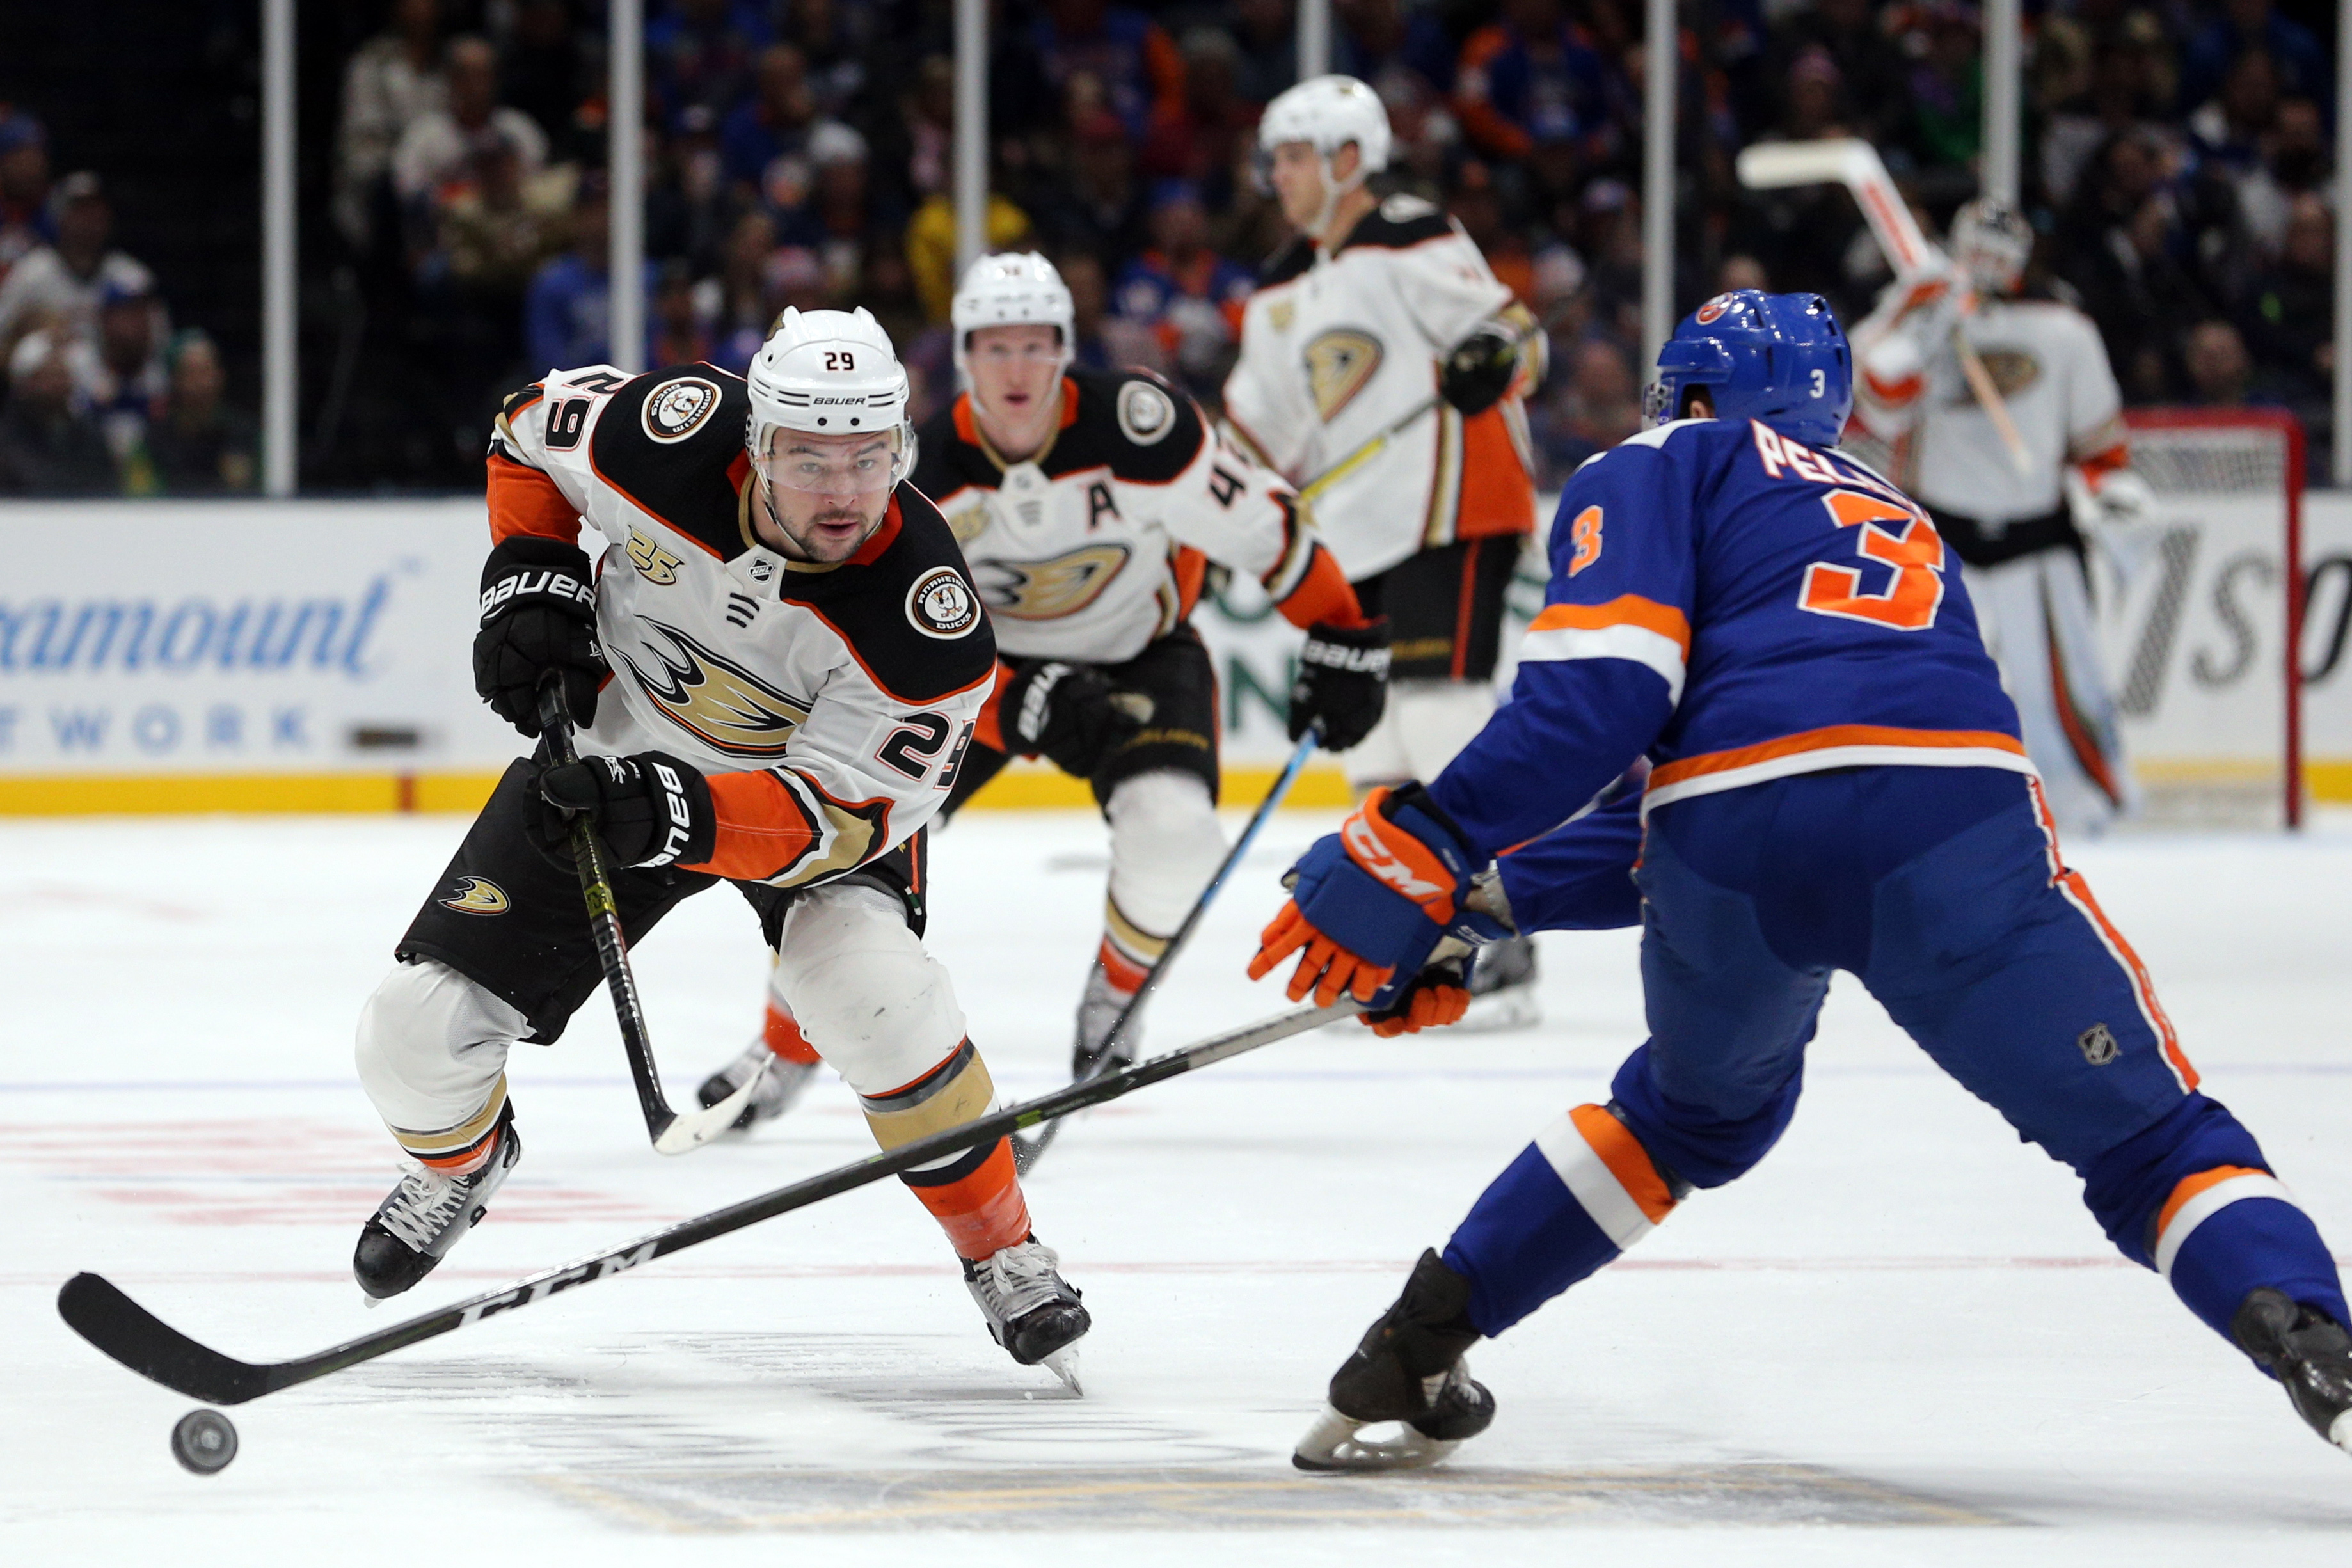 Jan 20, 2019; Uniondale, NY, USA; Anaheim Ducks center Devin Shore (29) plays the puck against New York Islanders defenseman Adam Pelech (3) during the first period at Nassau Veterans Memorial Coliseum. Mandatory Credit: Brad Penner-USA TODAY Sports